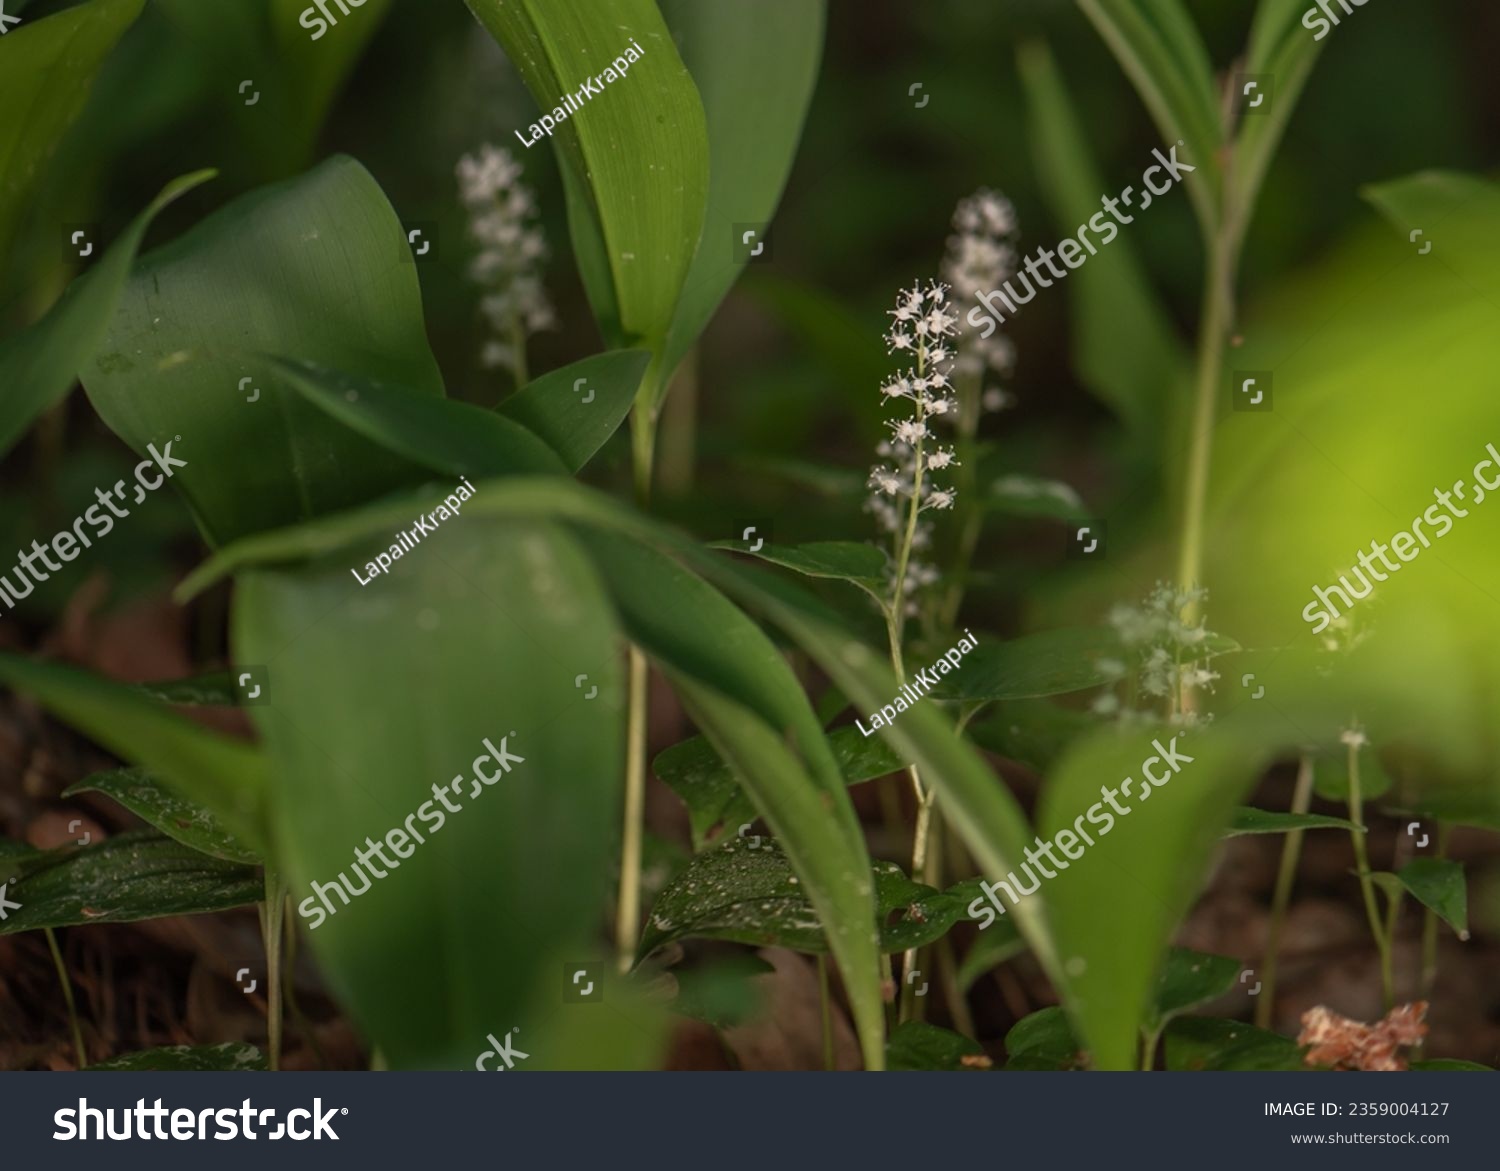 Maianthemum bifolium or false lily of the valley or May lily is often a localized common rhizomatous flowering plant. Growing in the forest. #2359004127